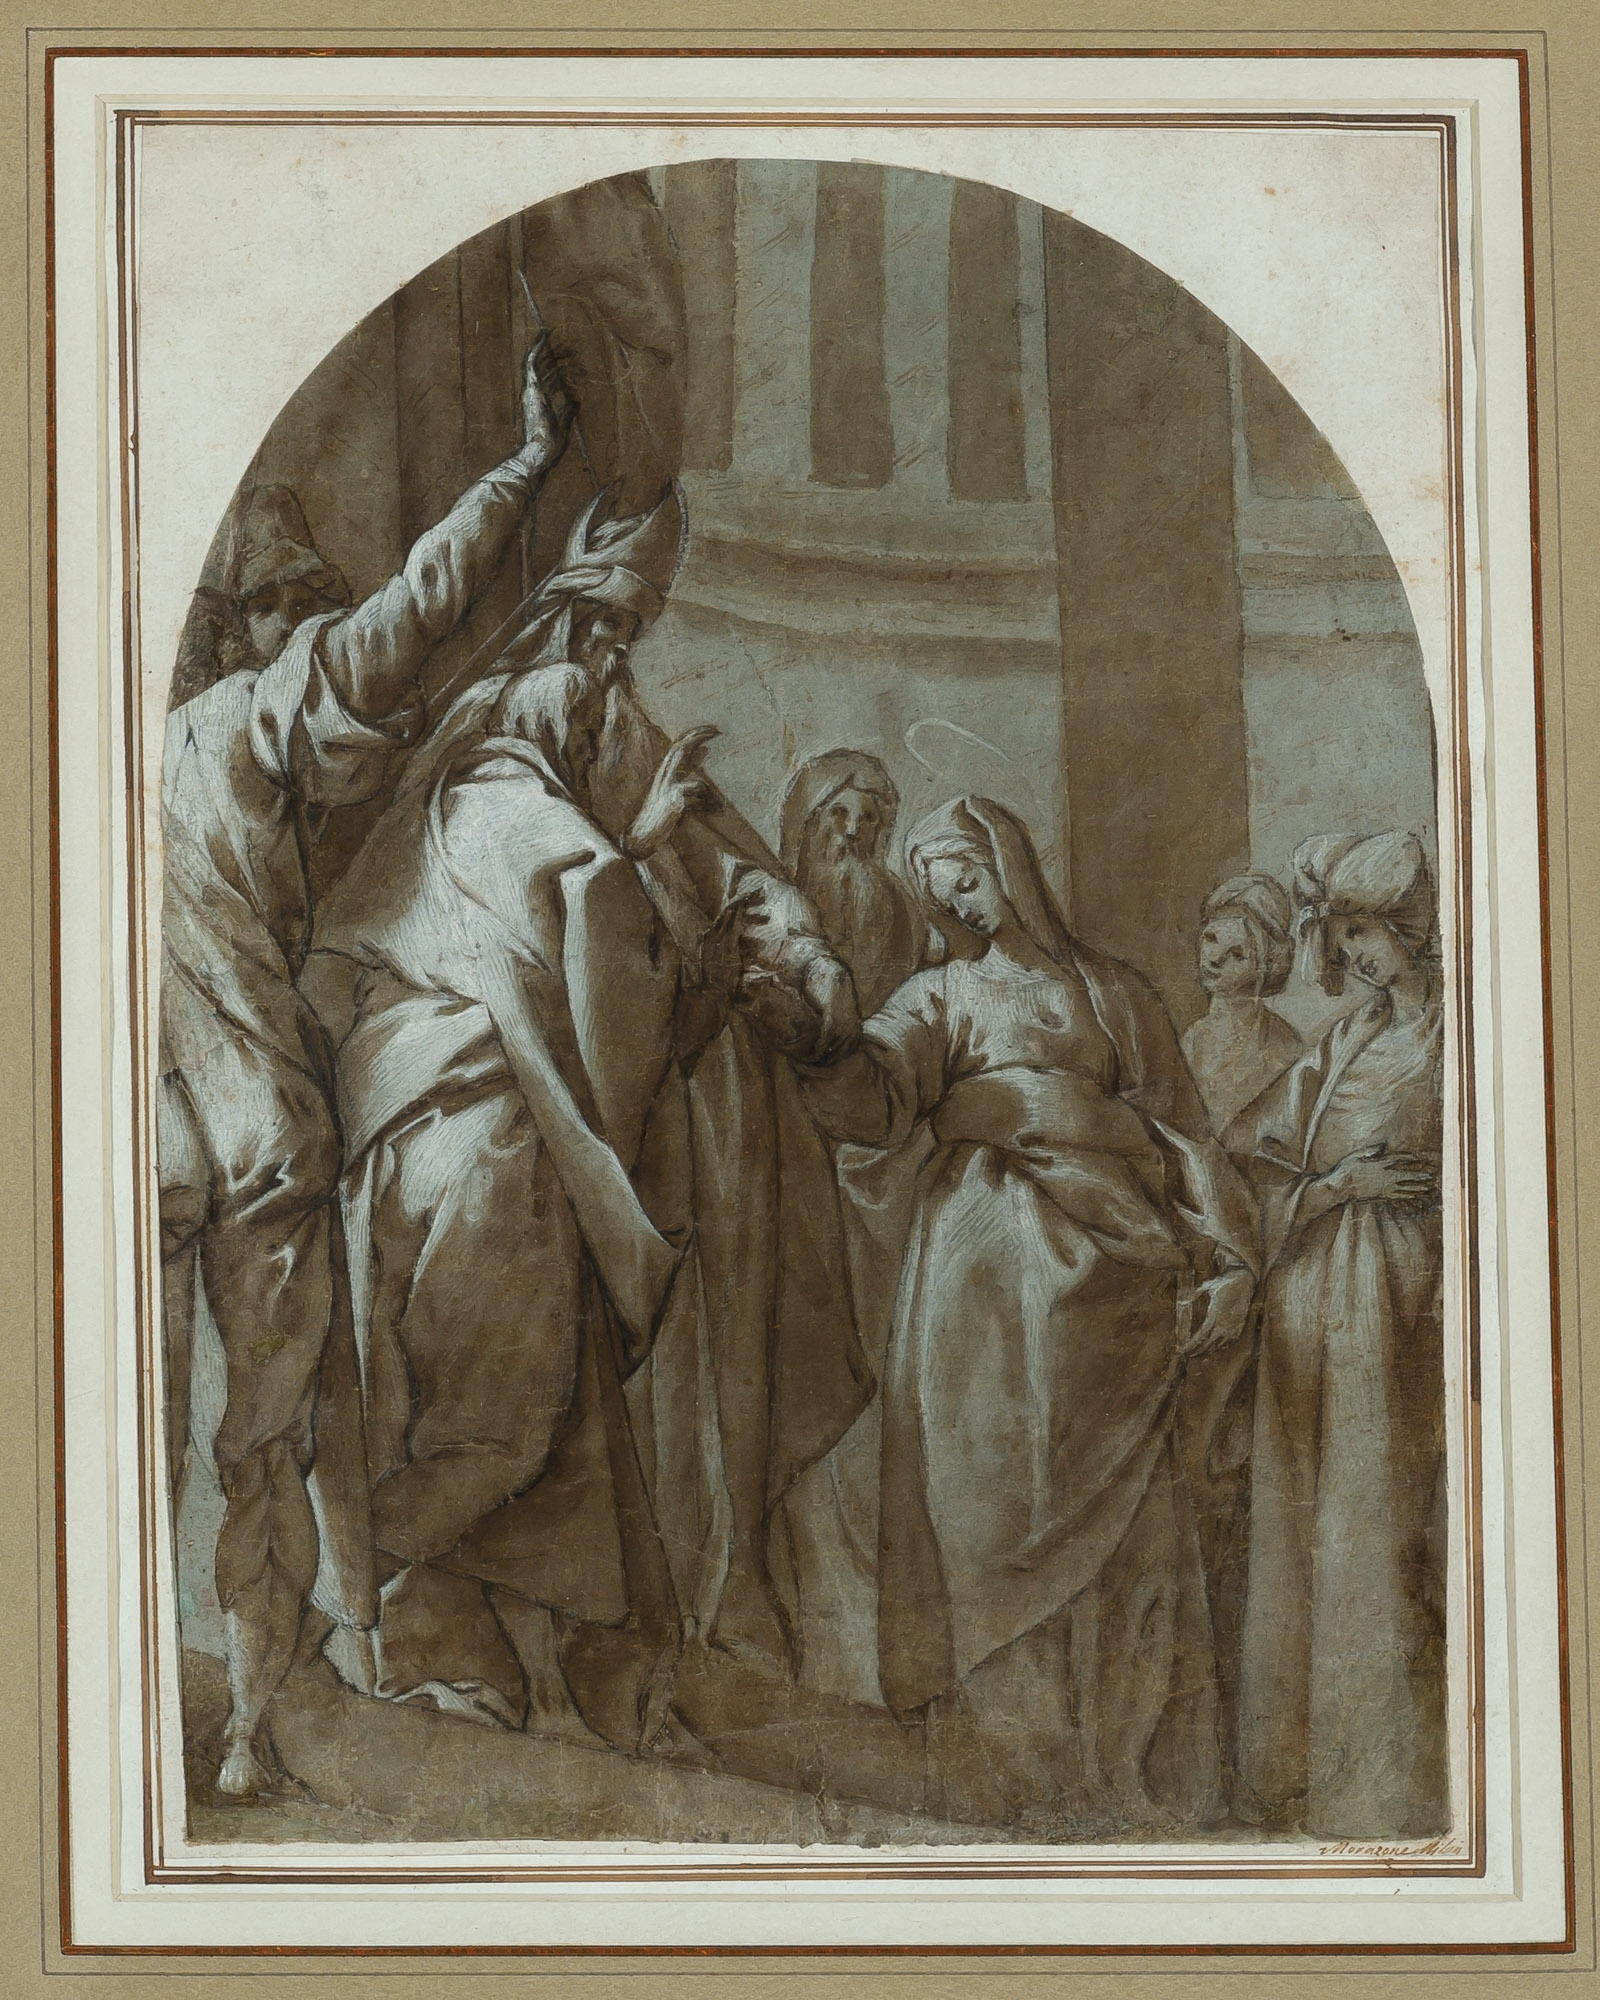 The Betrothal of the Virgin by Morazzone, circa 1615-16